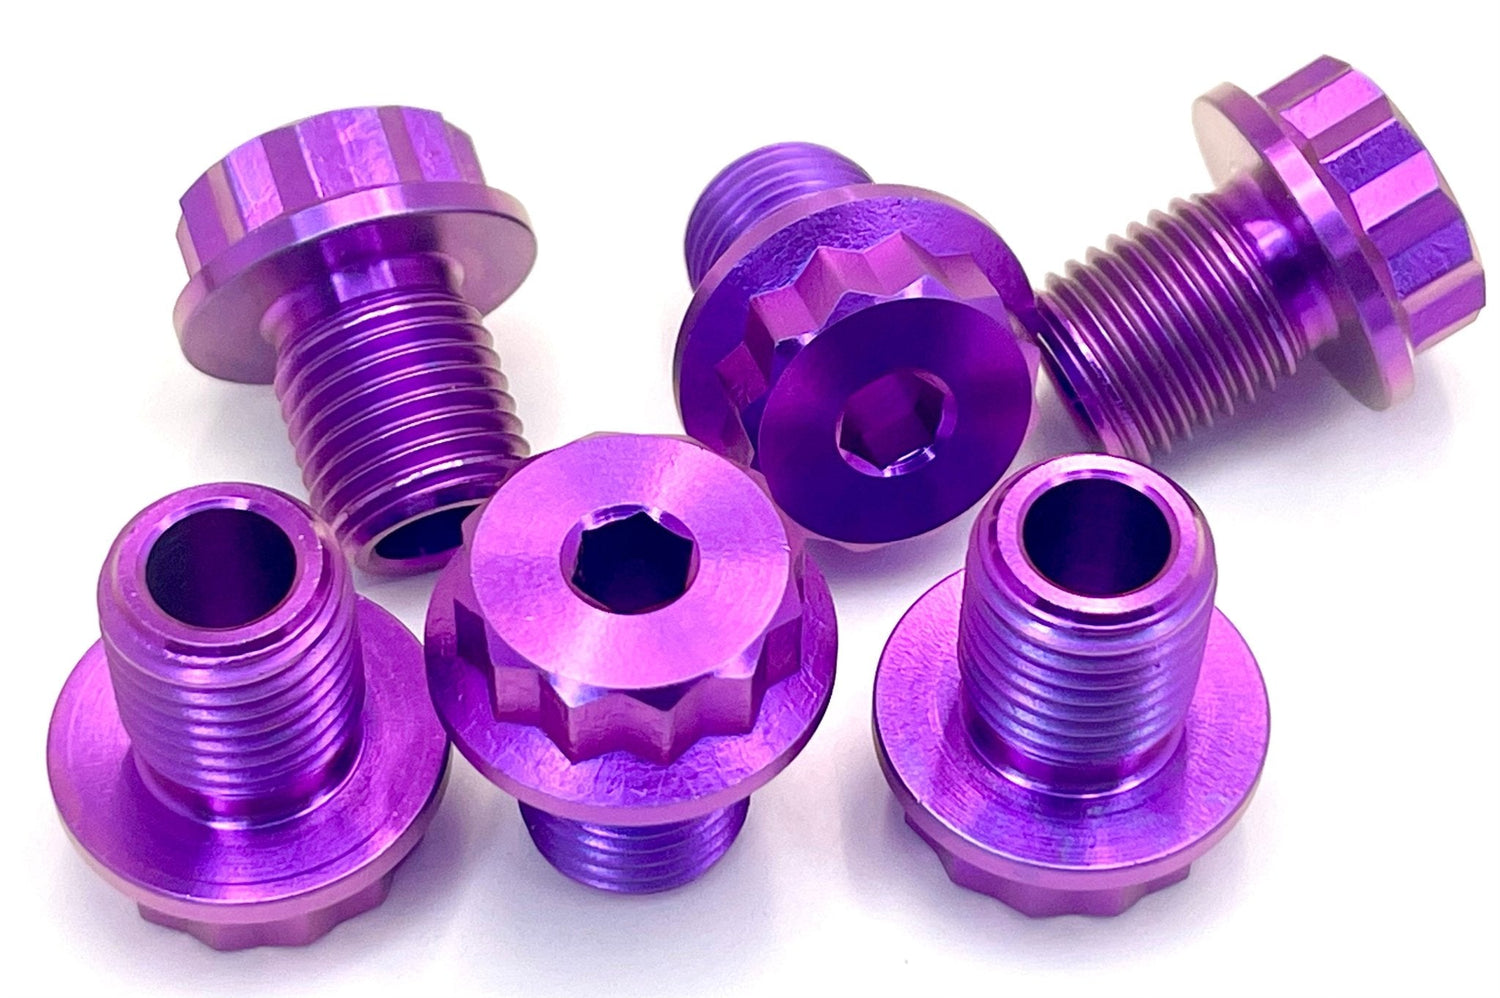 Purple FastAce Fork Axle Bolts for Surron, Talaria, 79 Bike, Rerode, E-Ride Pro, Pro SS, Segway, Stealth Bomber and more